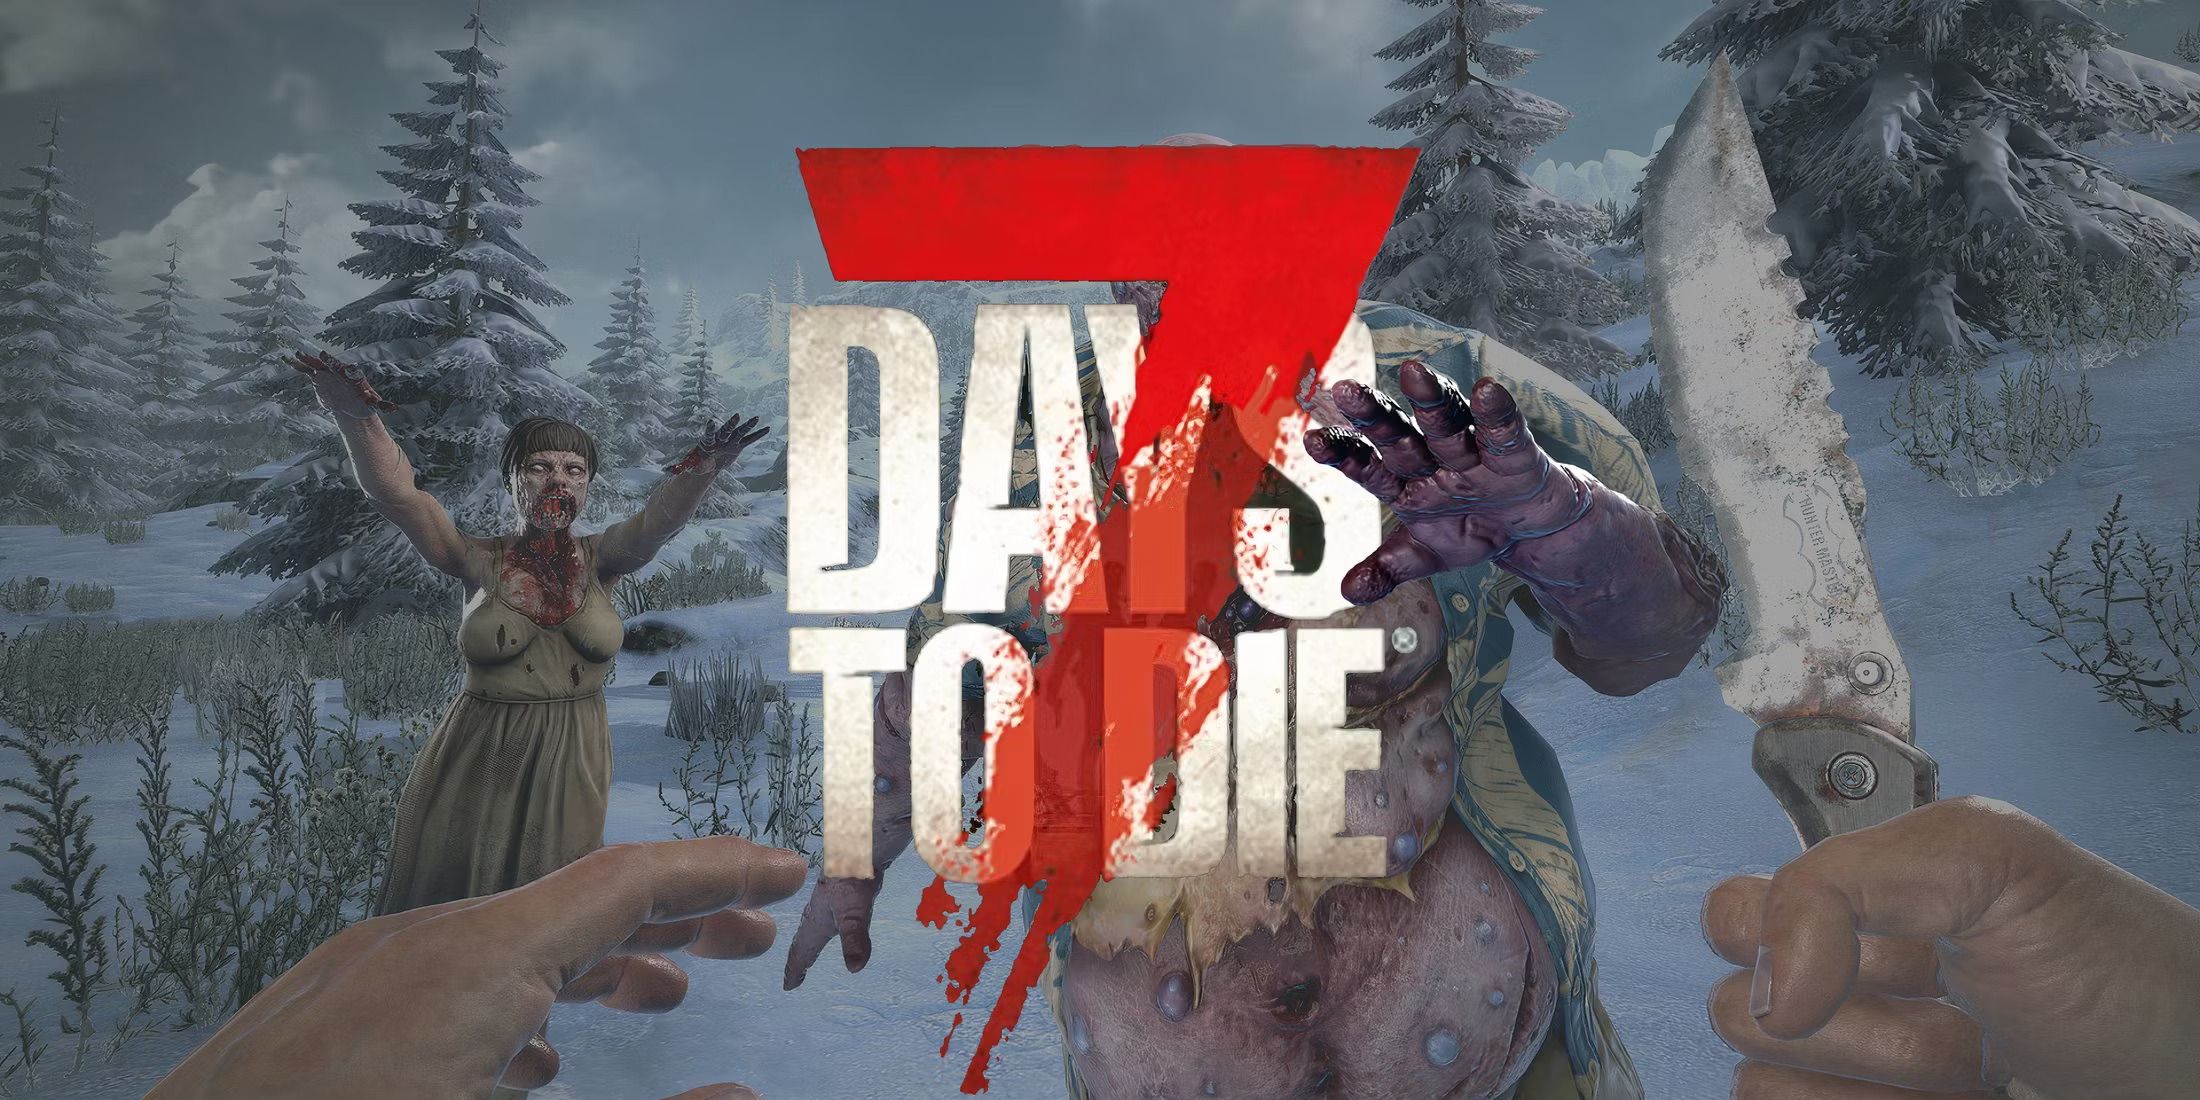 7-days-to-die-zombies-with-game-logo-edit.jpg